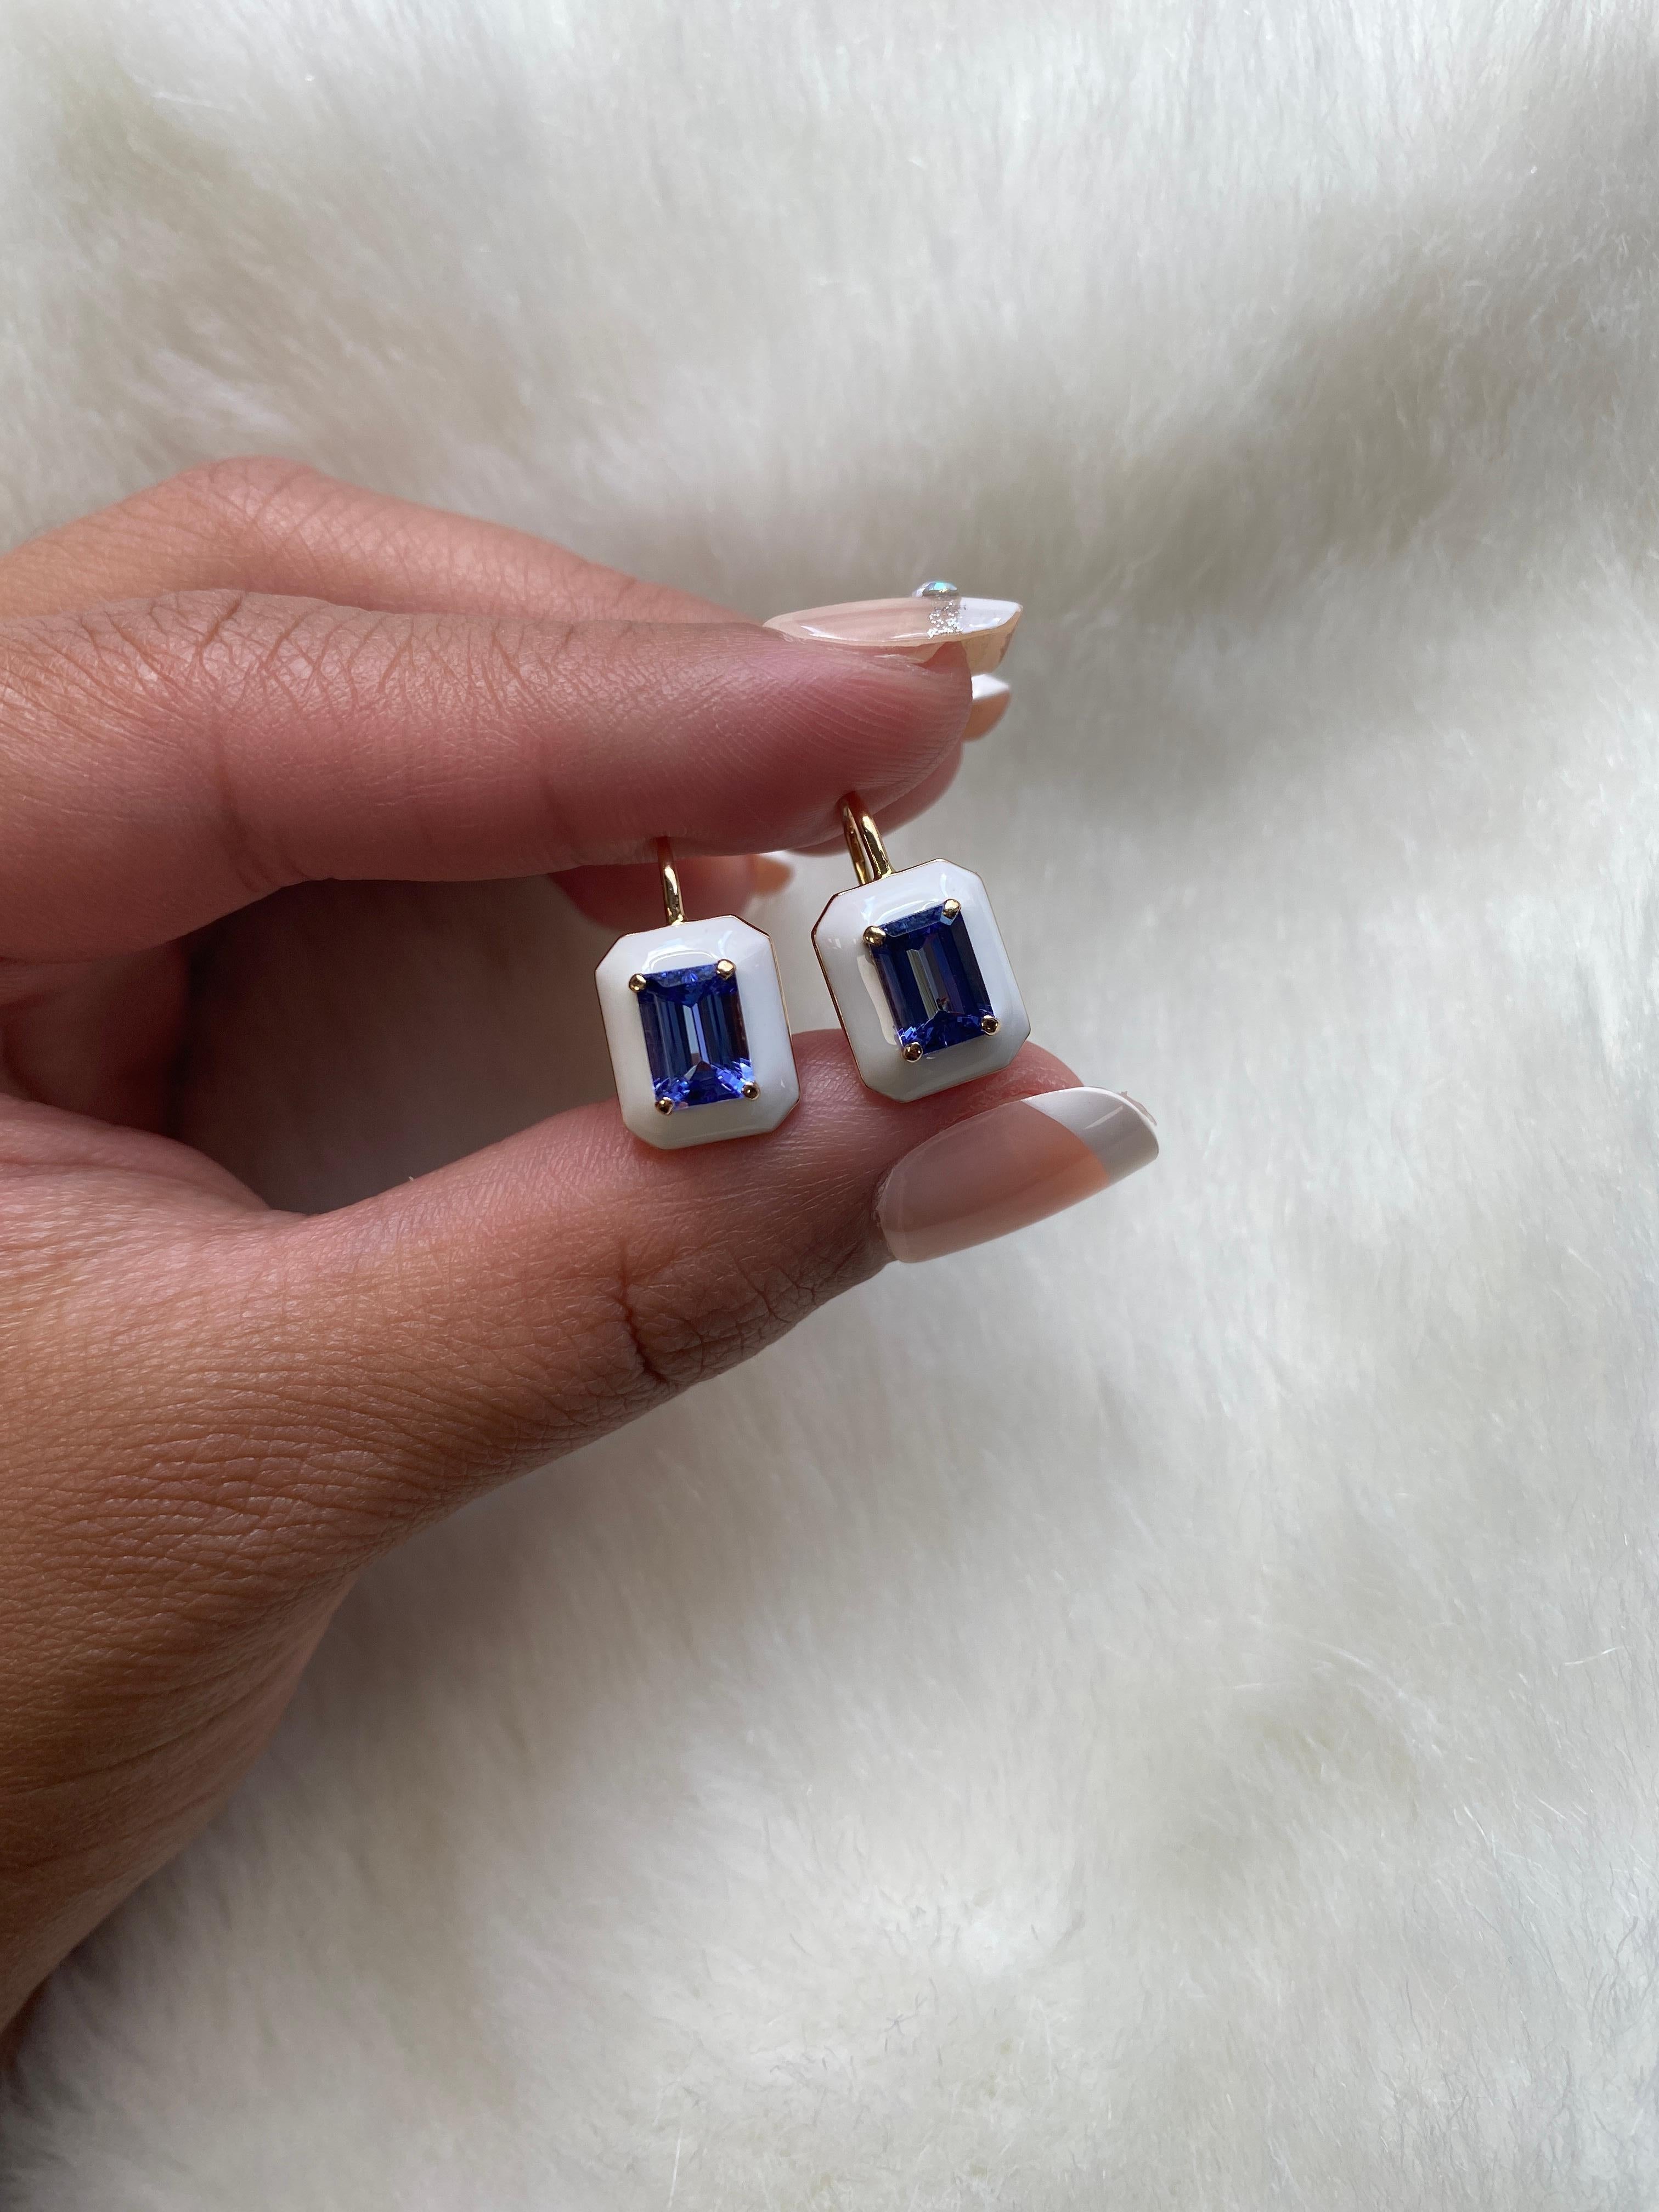 These unique earrings are a Tanzanite Emerald Cut, with White Enamel border and Lever back. From our ‘Queen’ Collection, it was inspired by royalty, but with a modern twist. The combination of enamel, and Tanzanite represents power, richness and